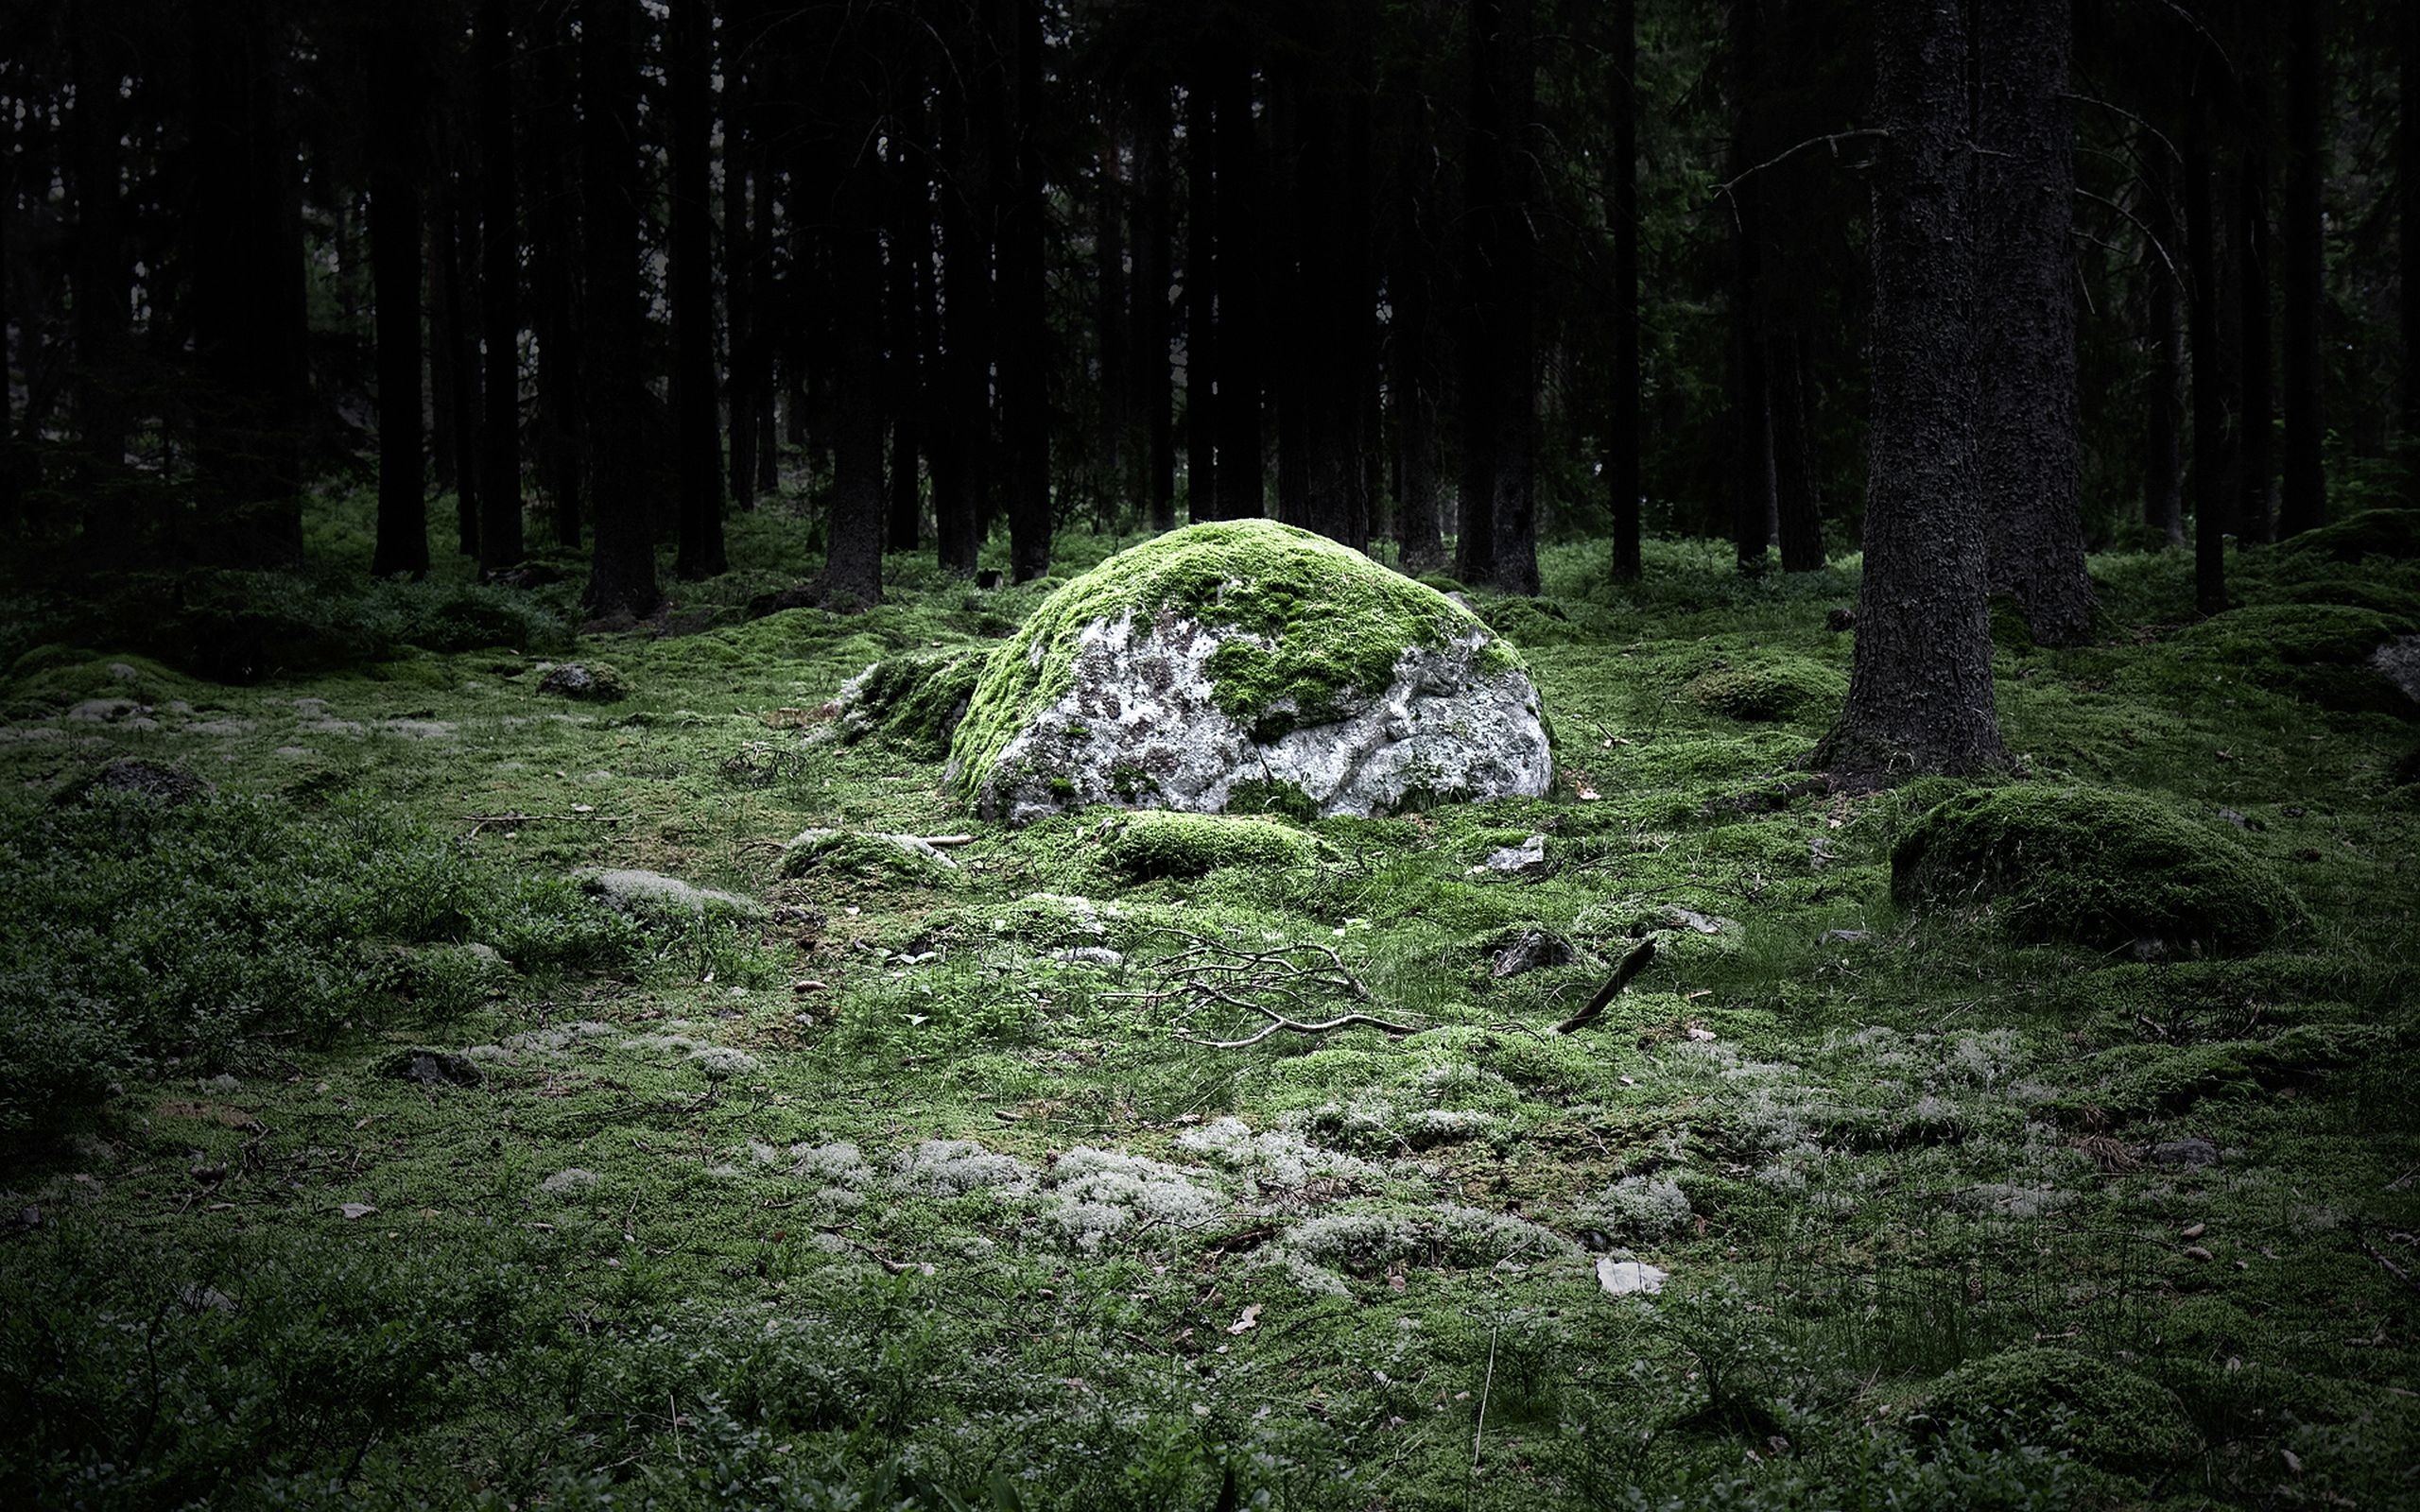 Download wallpaper 2560x1600 grass, stone, trees hd background